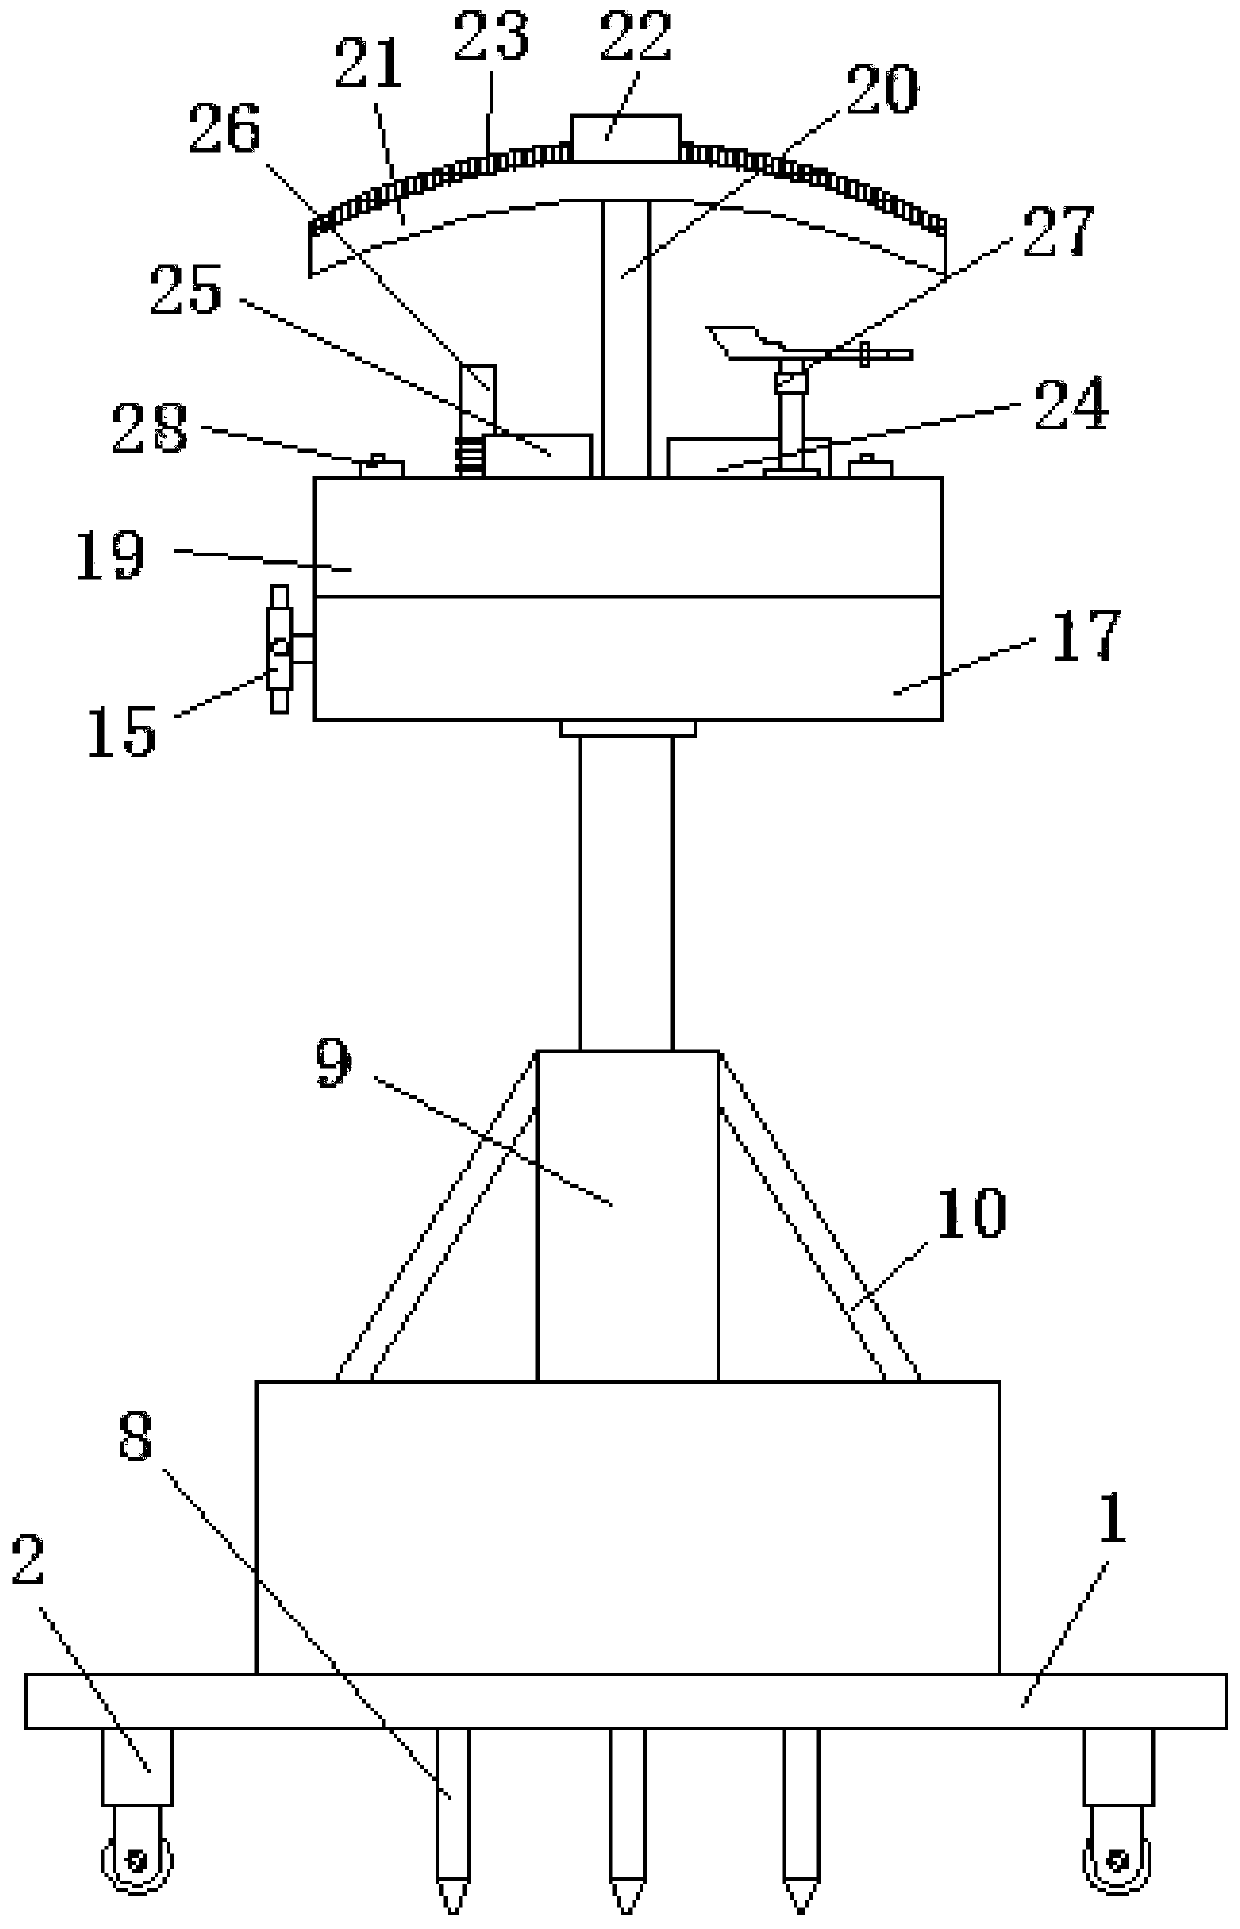 Agricultural information acquisition device convenient to install